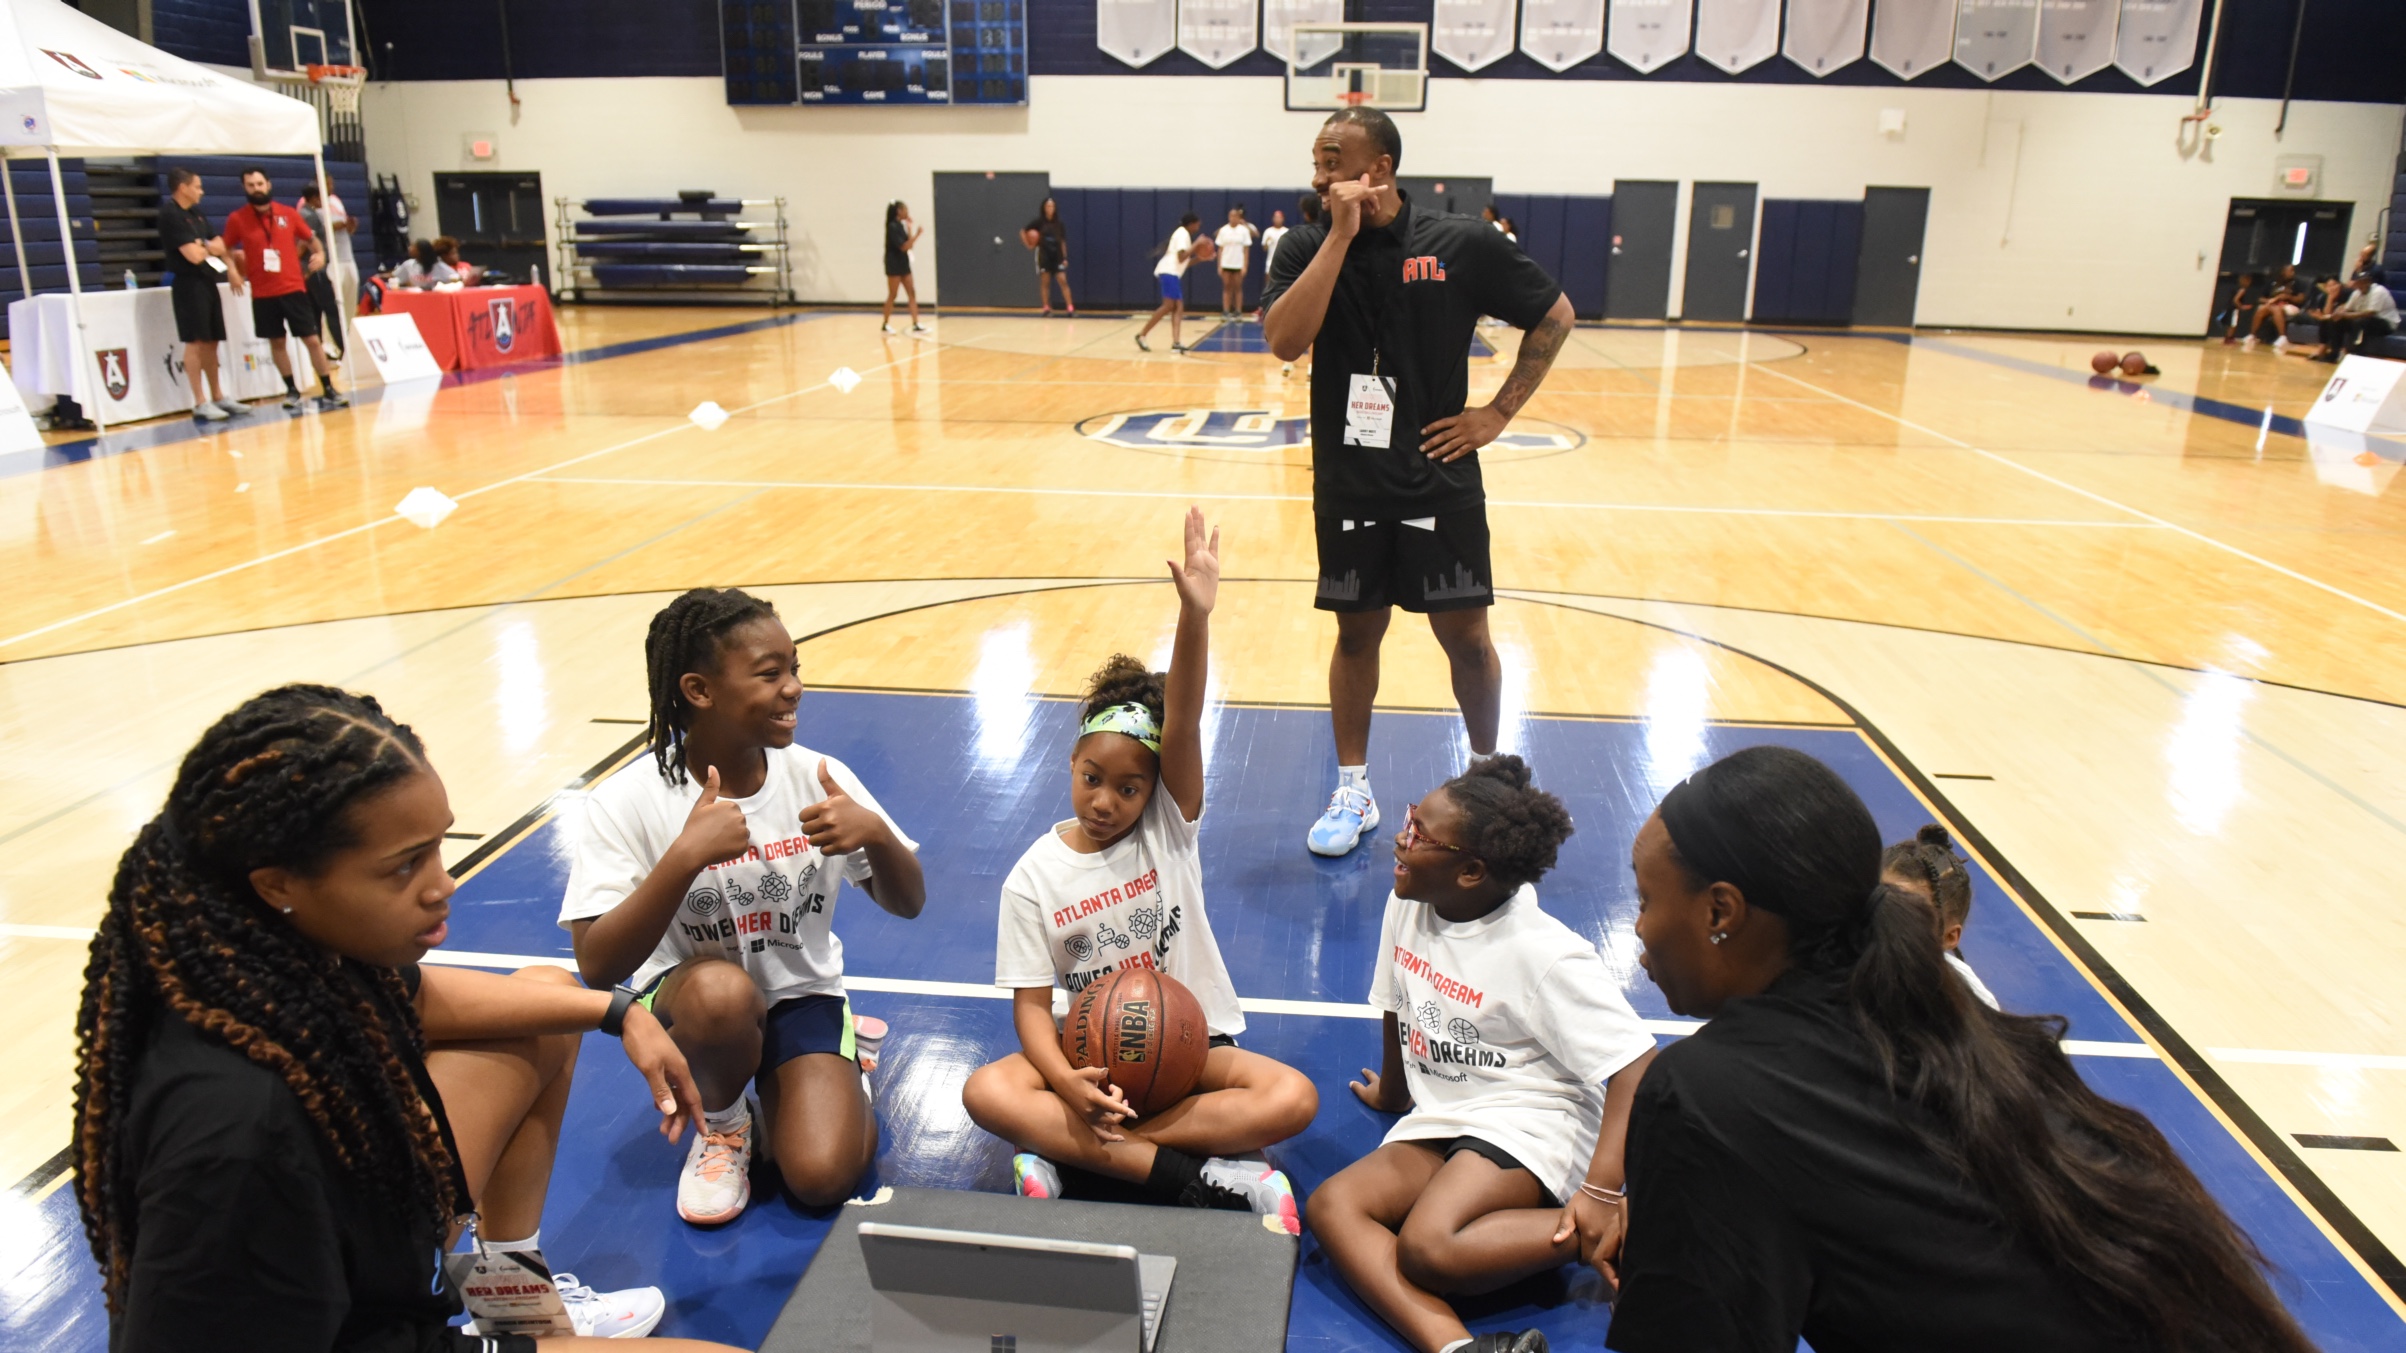 A coach addressing young basketball players during a training session in an indoor court.